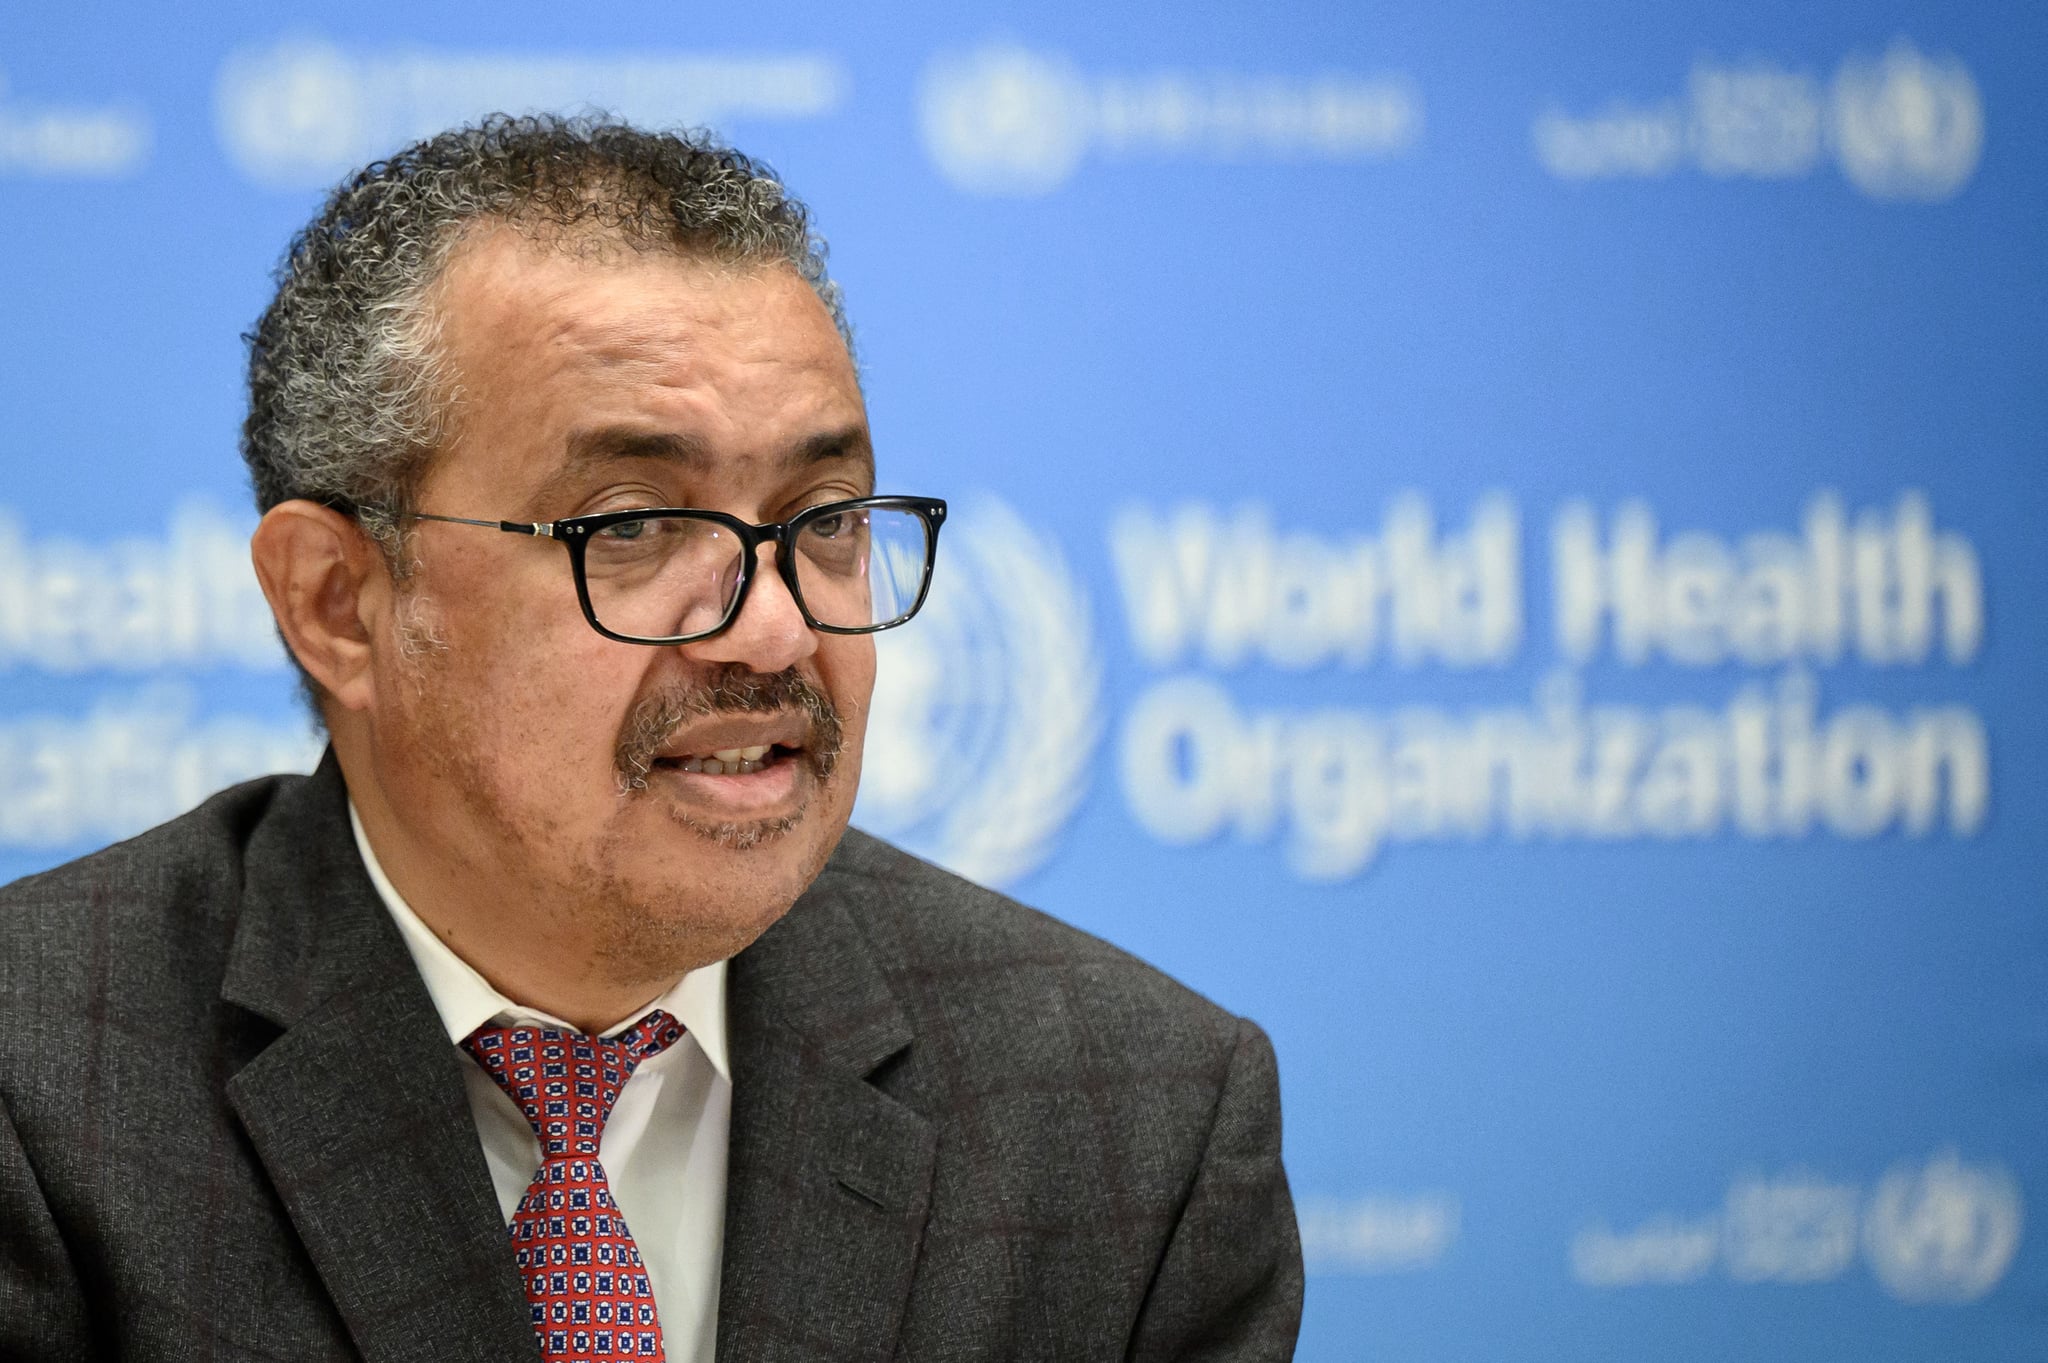 World Health Organization (WHO) Director-General Tedros Adhanom Ghebreyesus attends a ceremony to launch a multiyear partnership with Qatar on making FIFA Football World Cup 2022 and mega sporting events healthy and safe at the WHO headquarters in Geneva on October 18, 2021. (Photo by Fabrice COFFRINI / AFP) (Photo by FABRICE COFFRINI/AFP via Getty Images)